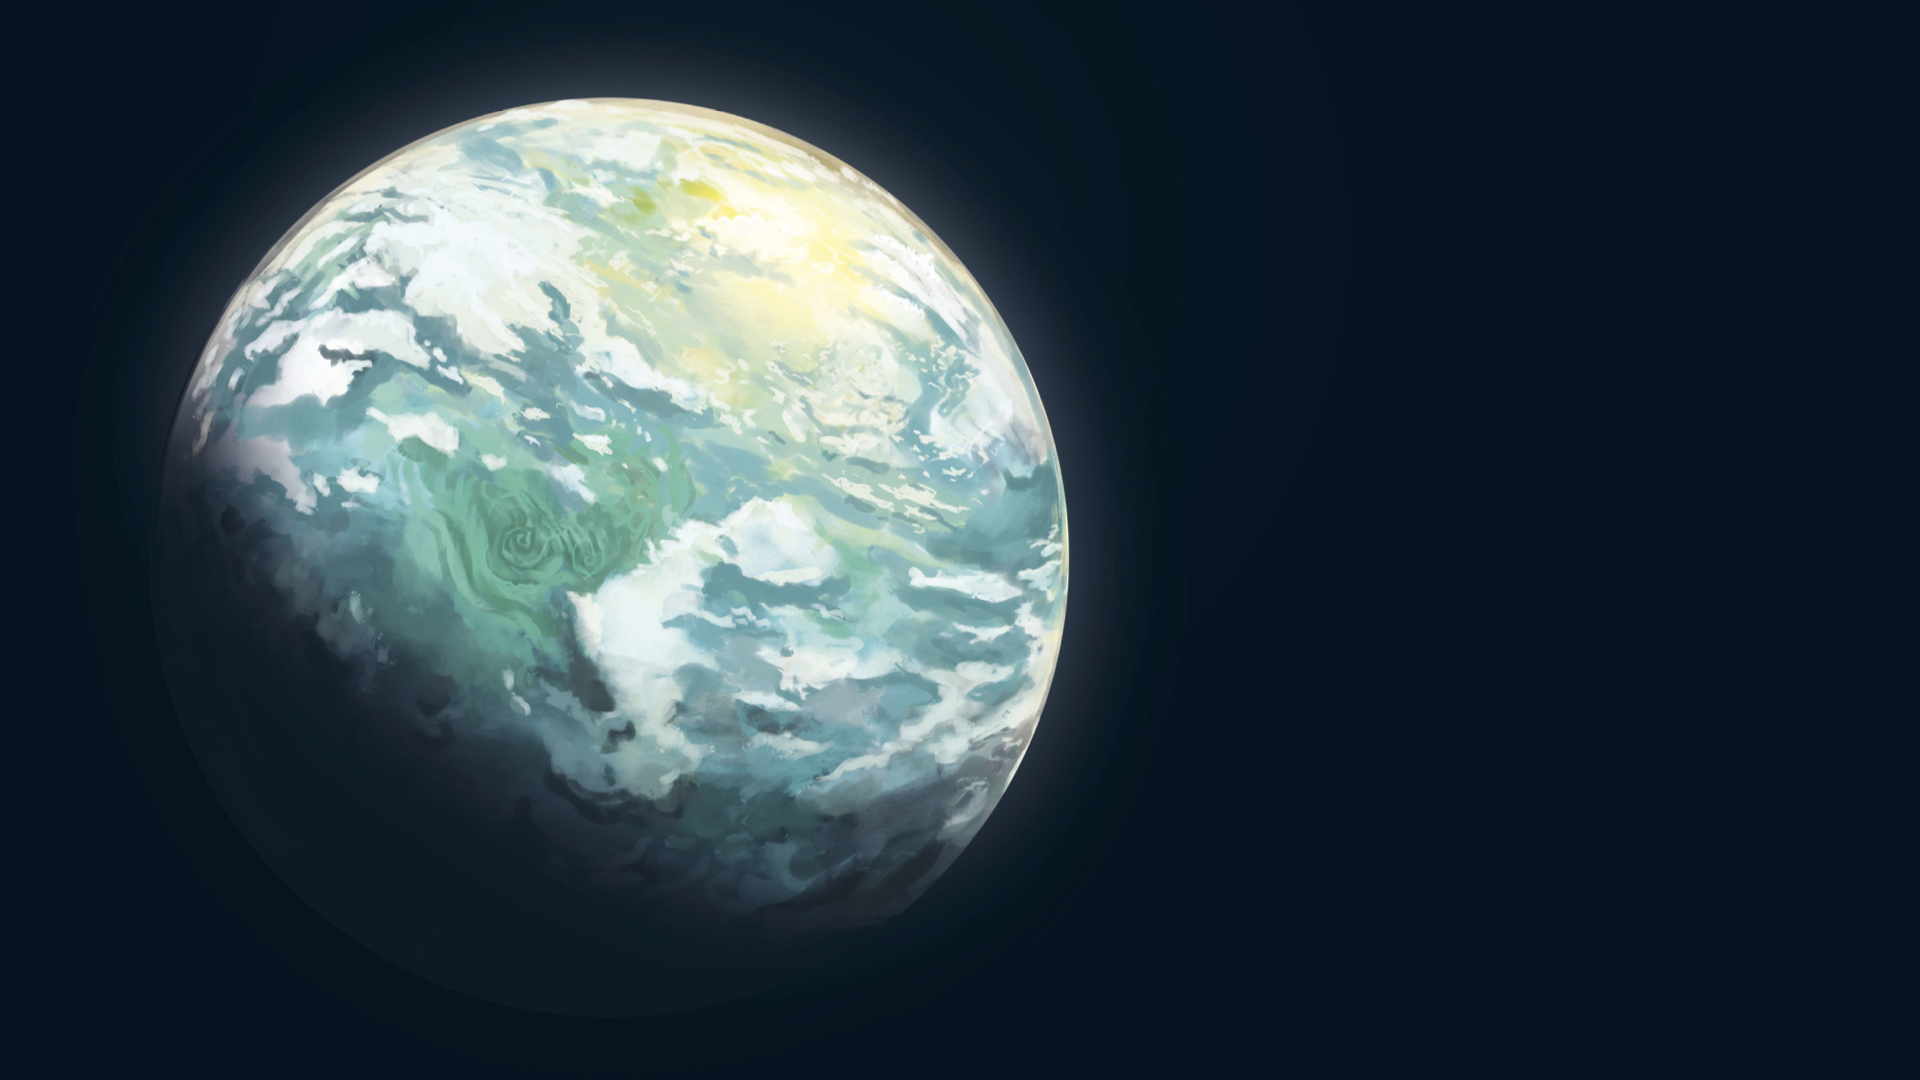 A painting of Gliese 667 Cc, seen from space